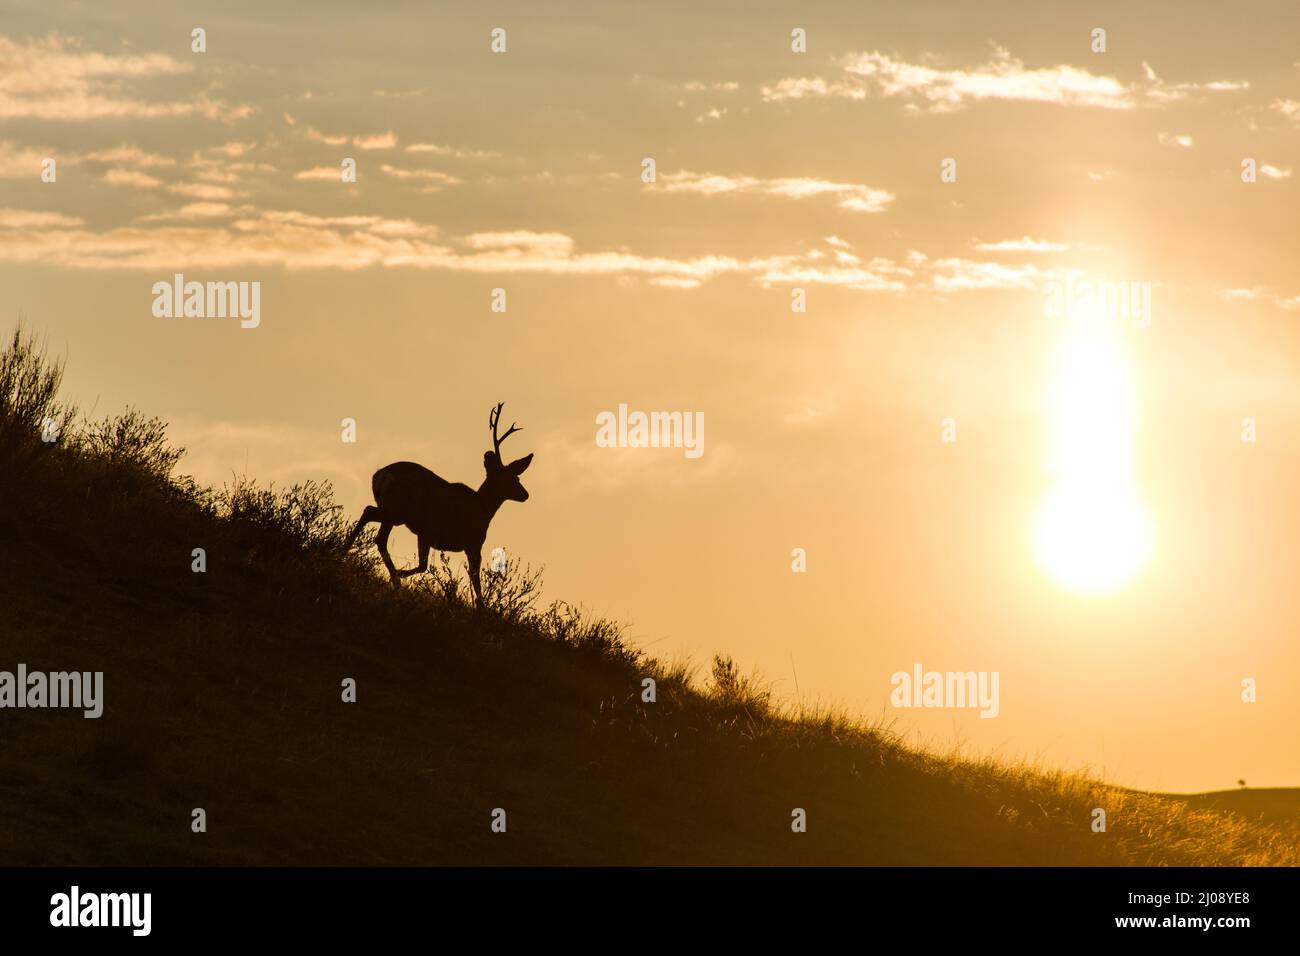 a silhouette of a mule deer that is shedding while running down a hill in theodore roosevelt national park north dakota 2J08YE8